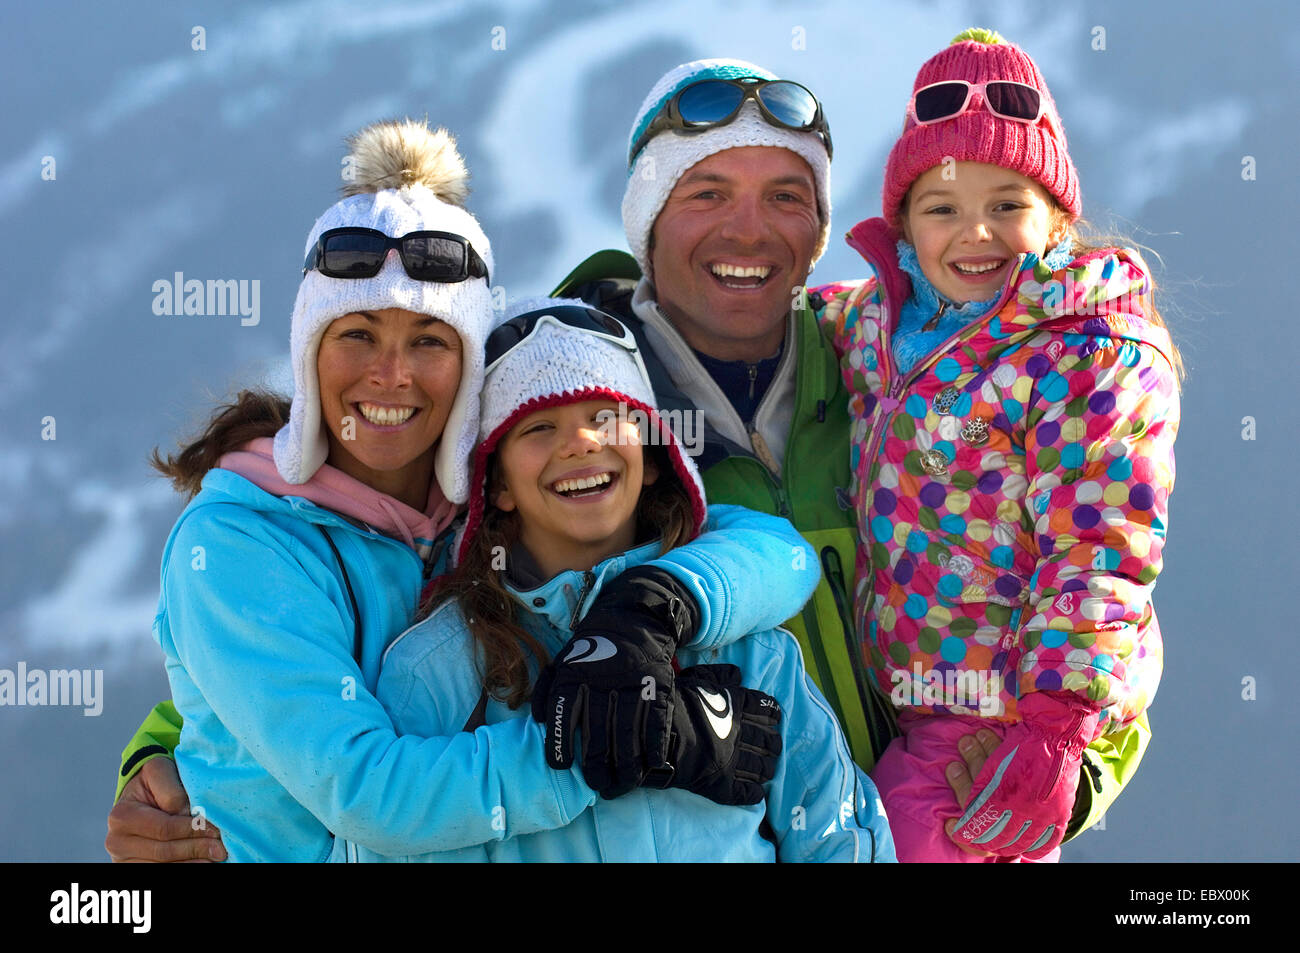 group photo of a family of four in winter clothing during holidays in the mountains, France Stock Photo